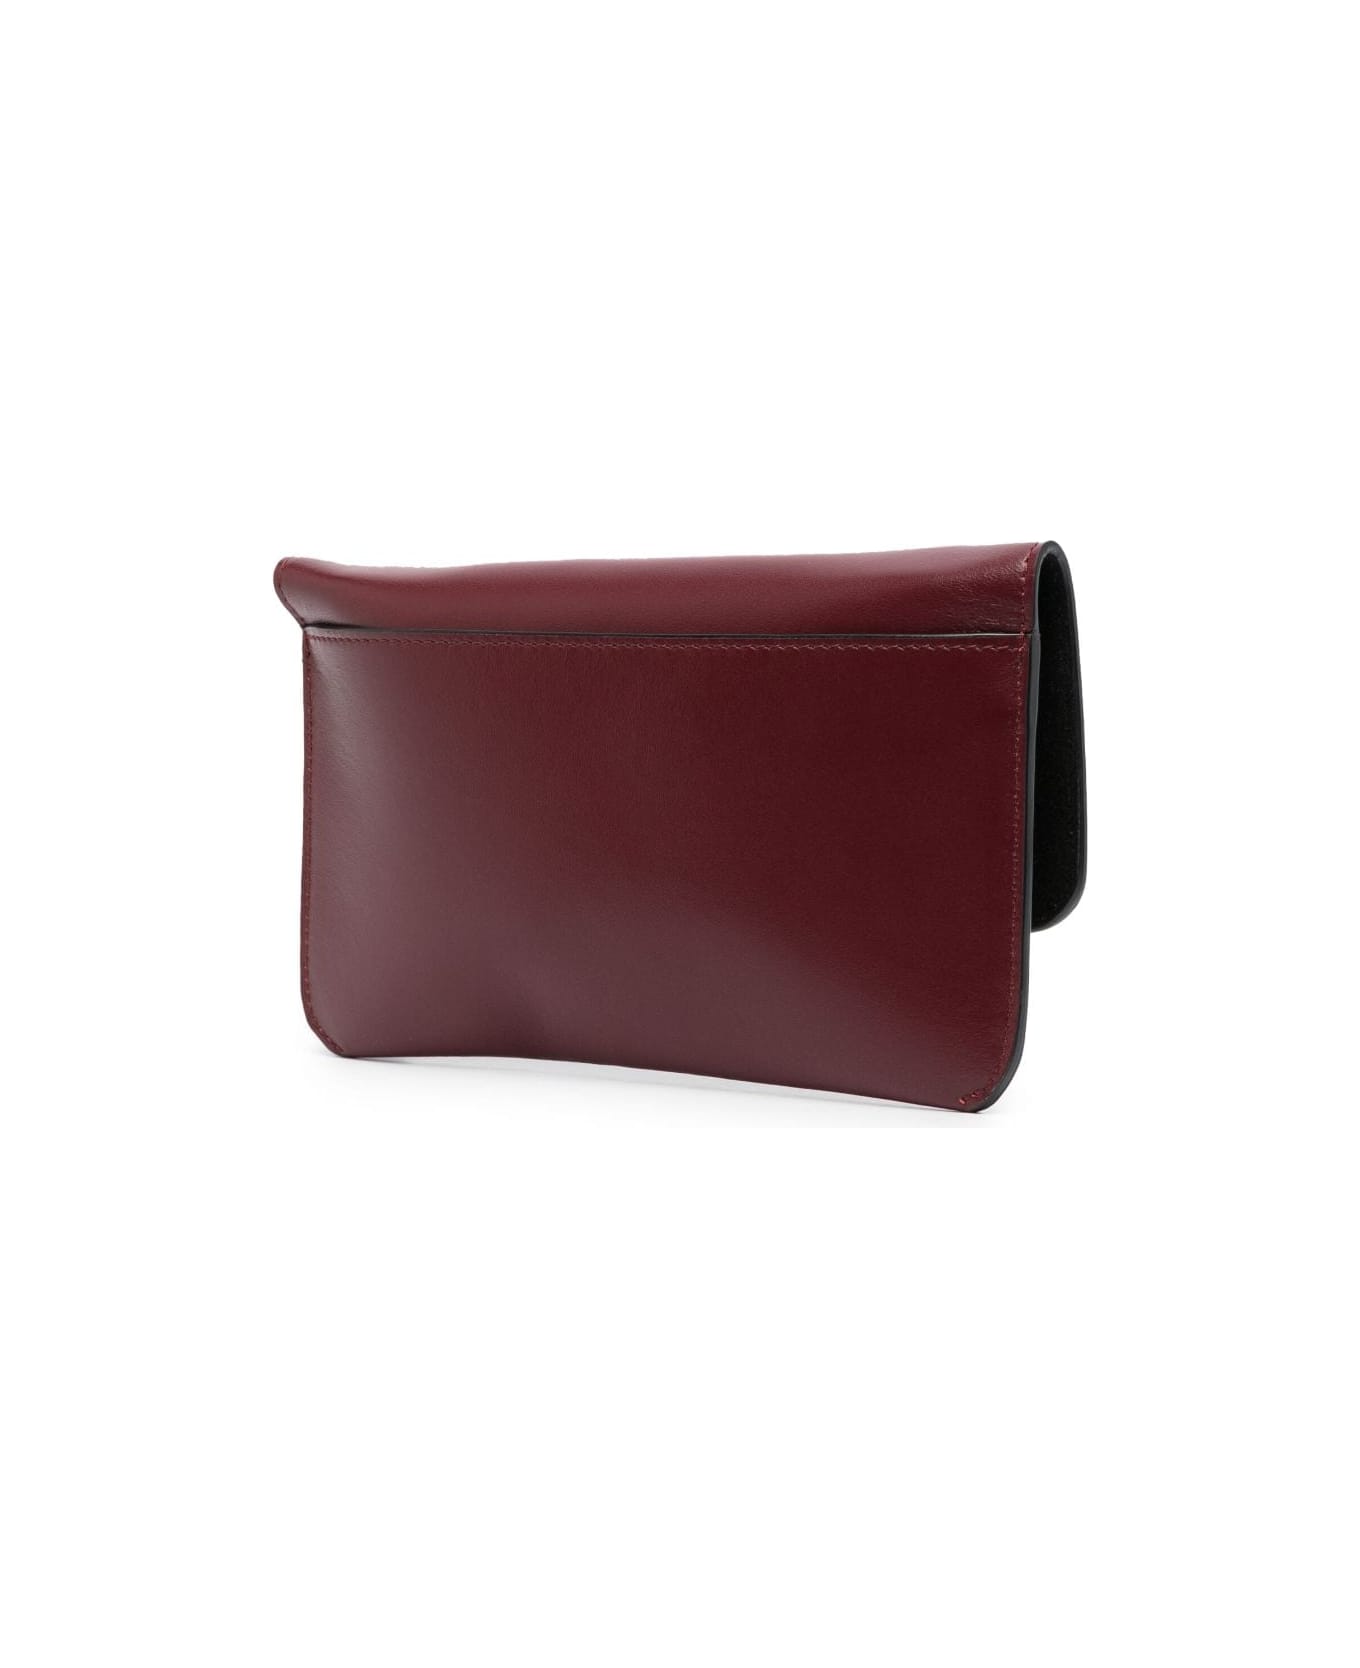 J.W. Anderson Chain Phone Pouch - Burgundy